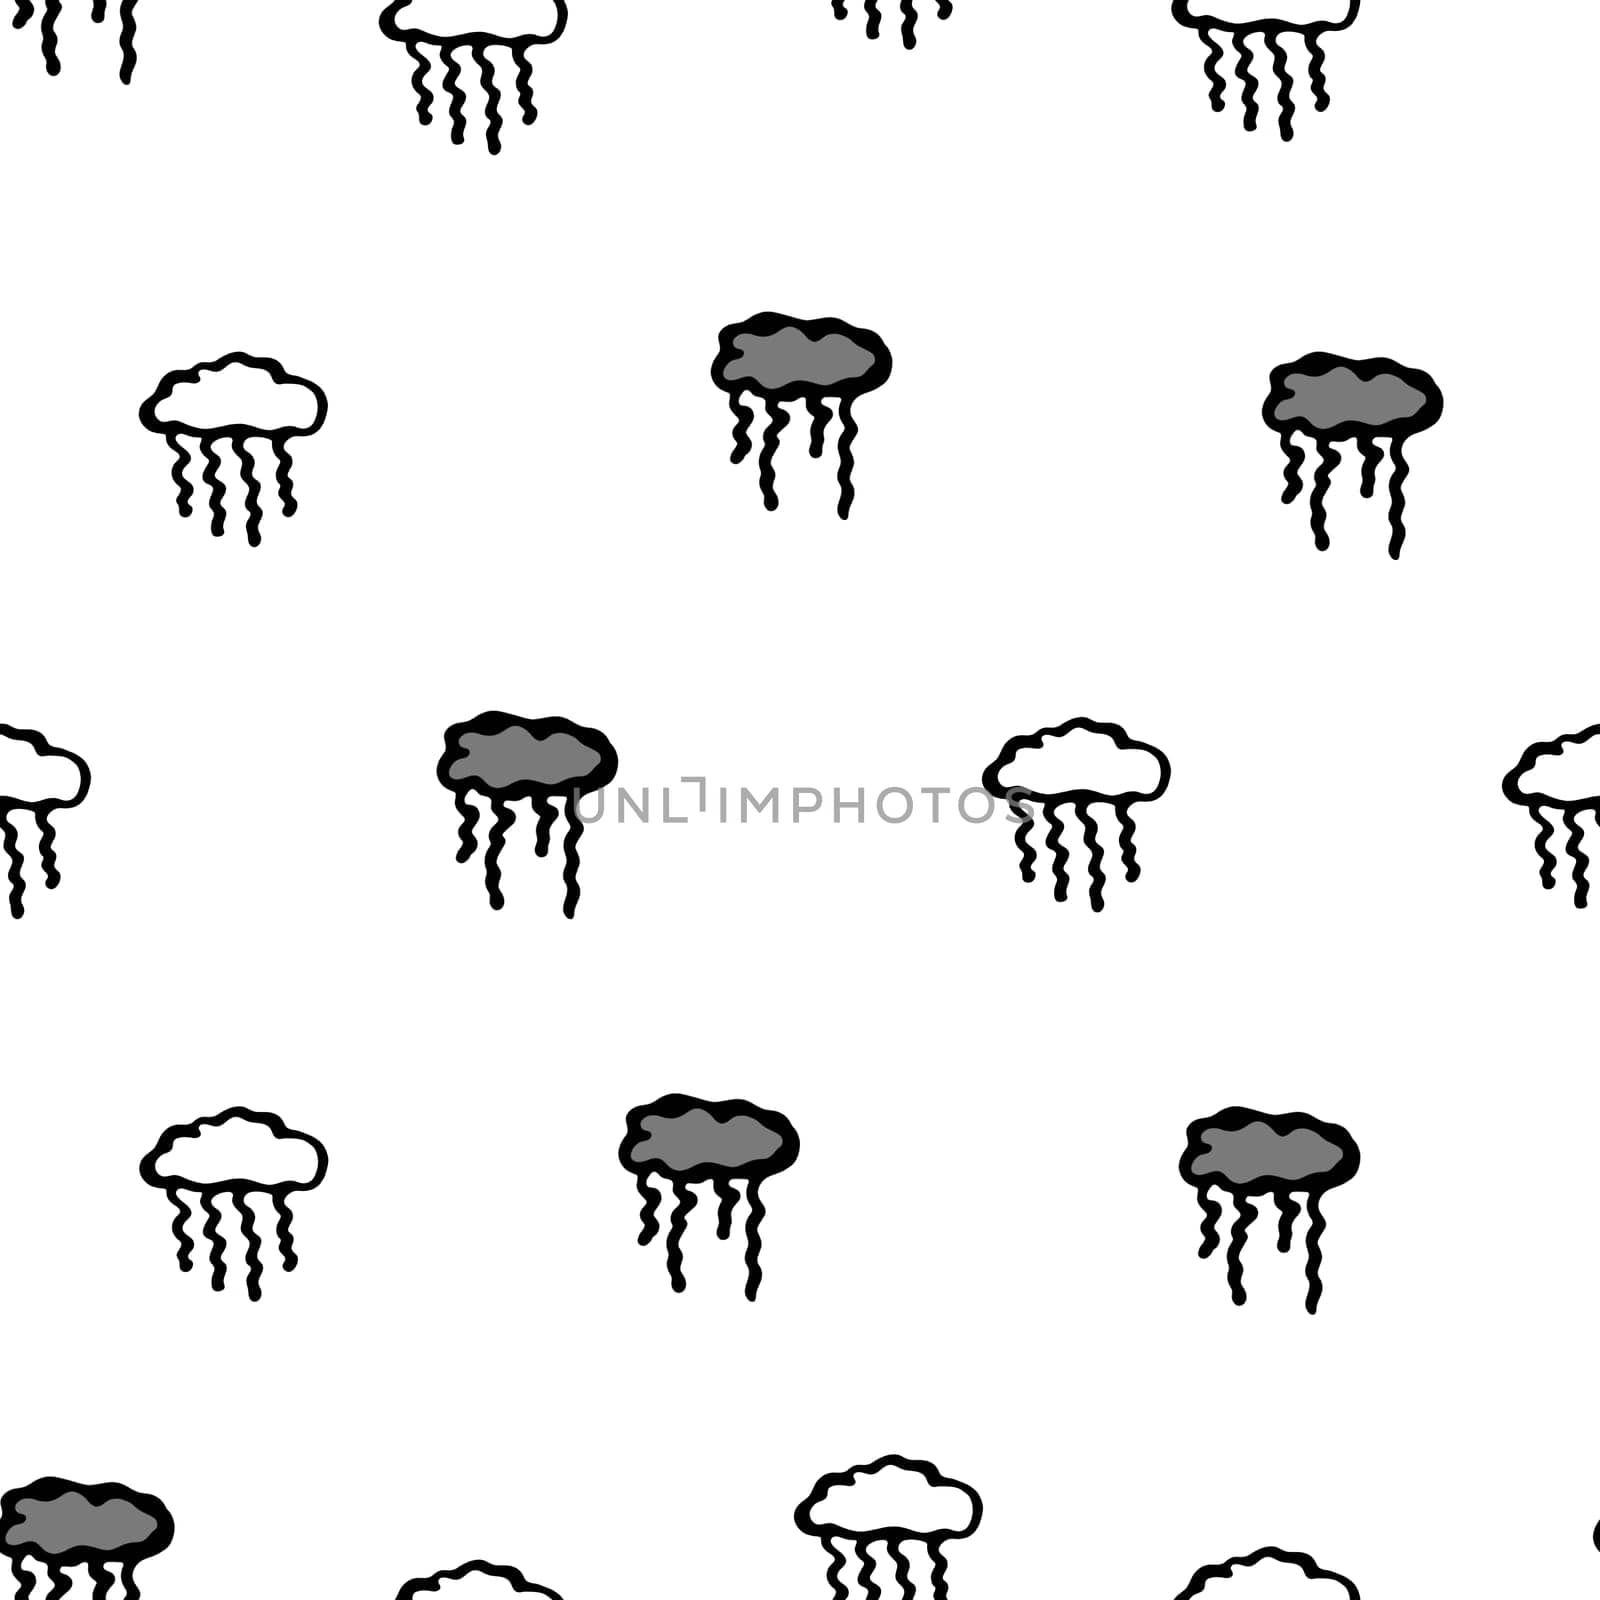 Hand Drawn Jellyfish Seamless Pattern. Sea Life Digital Paper. Underwater World Background with Jelly Fish in Black and White.